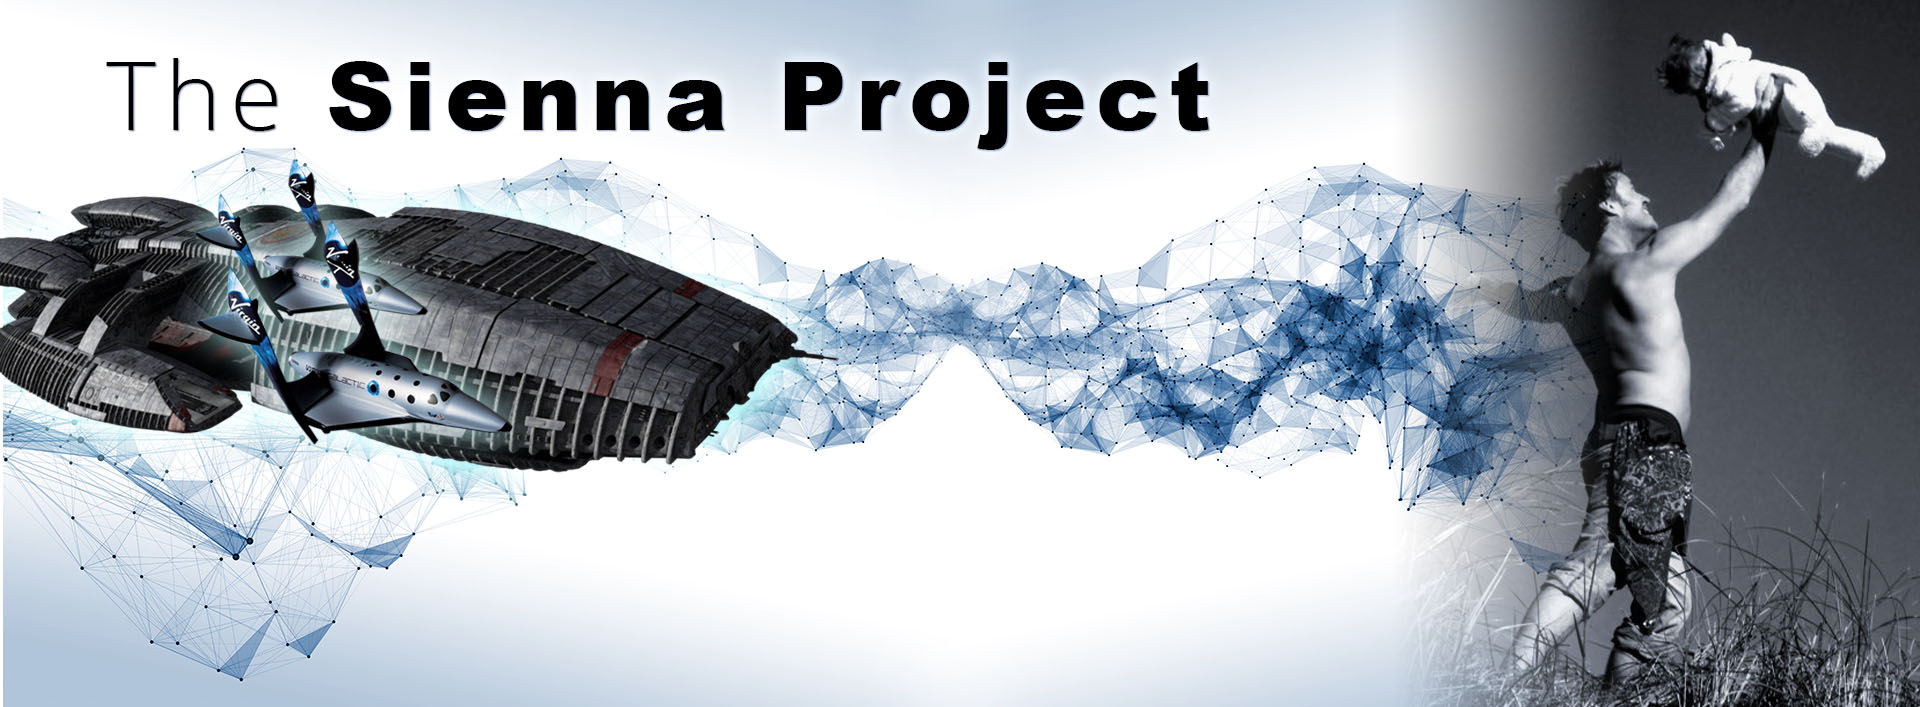 The-Sienna-Project__1